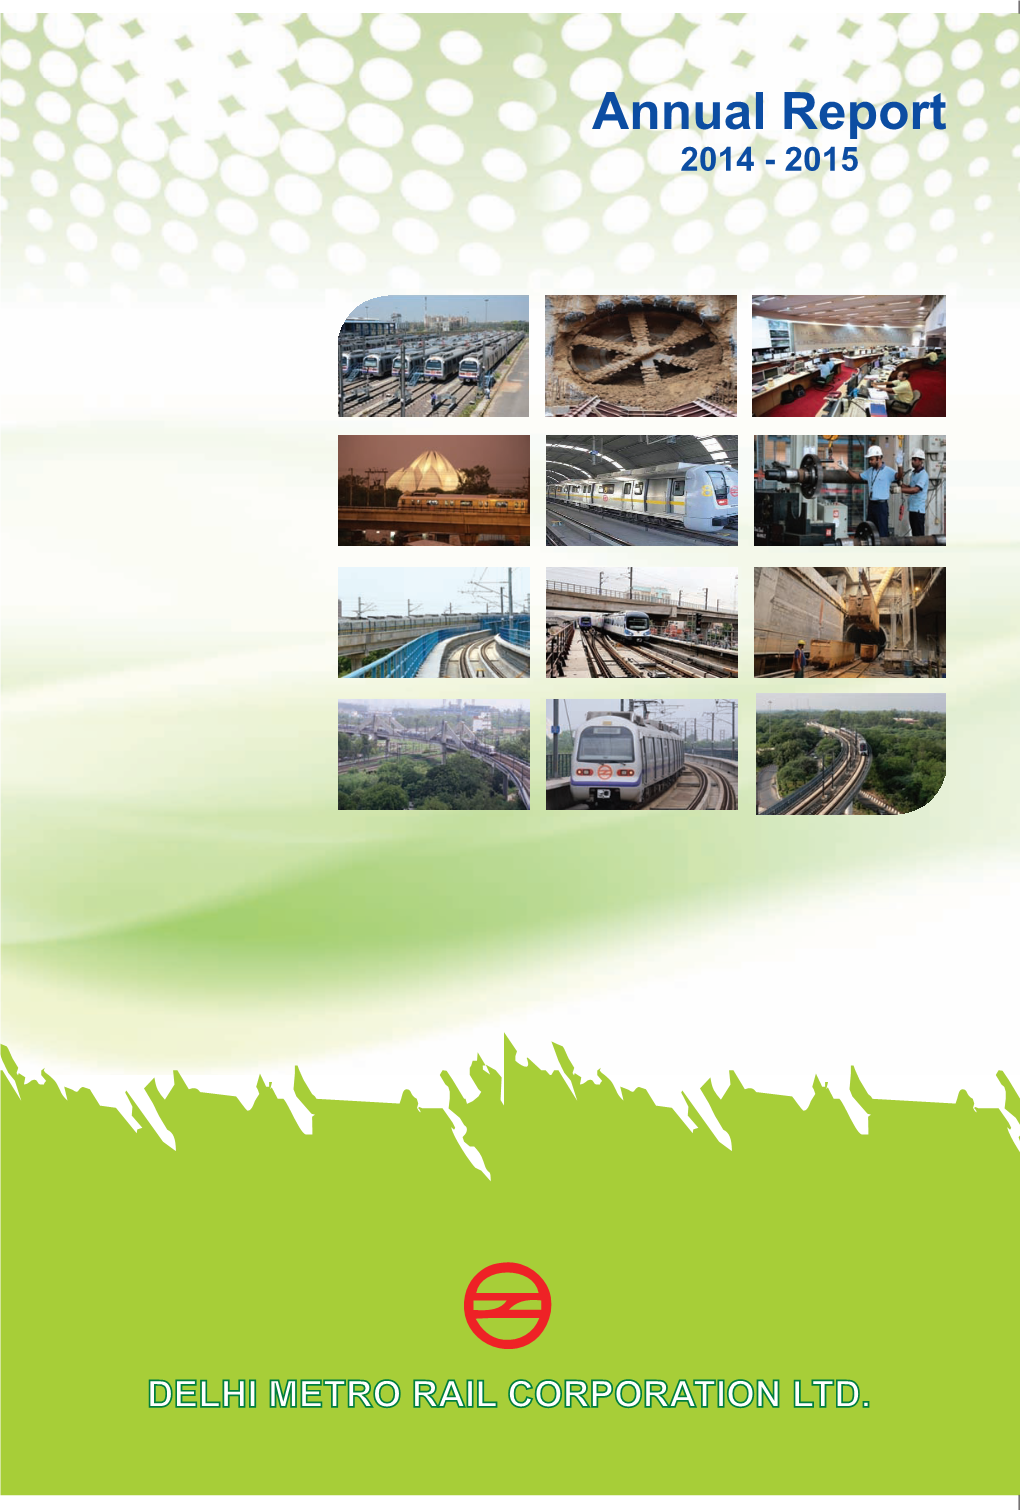 Annual Report 2014-15 DMRC Size